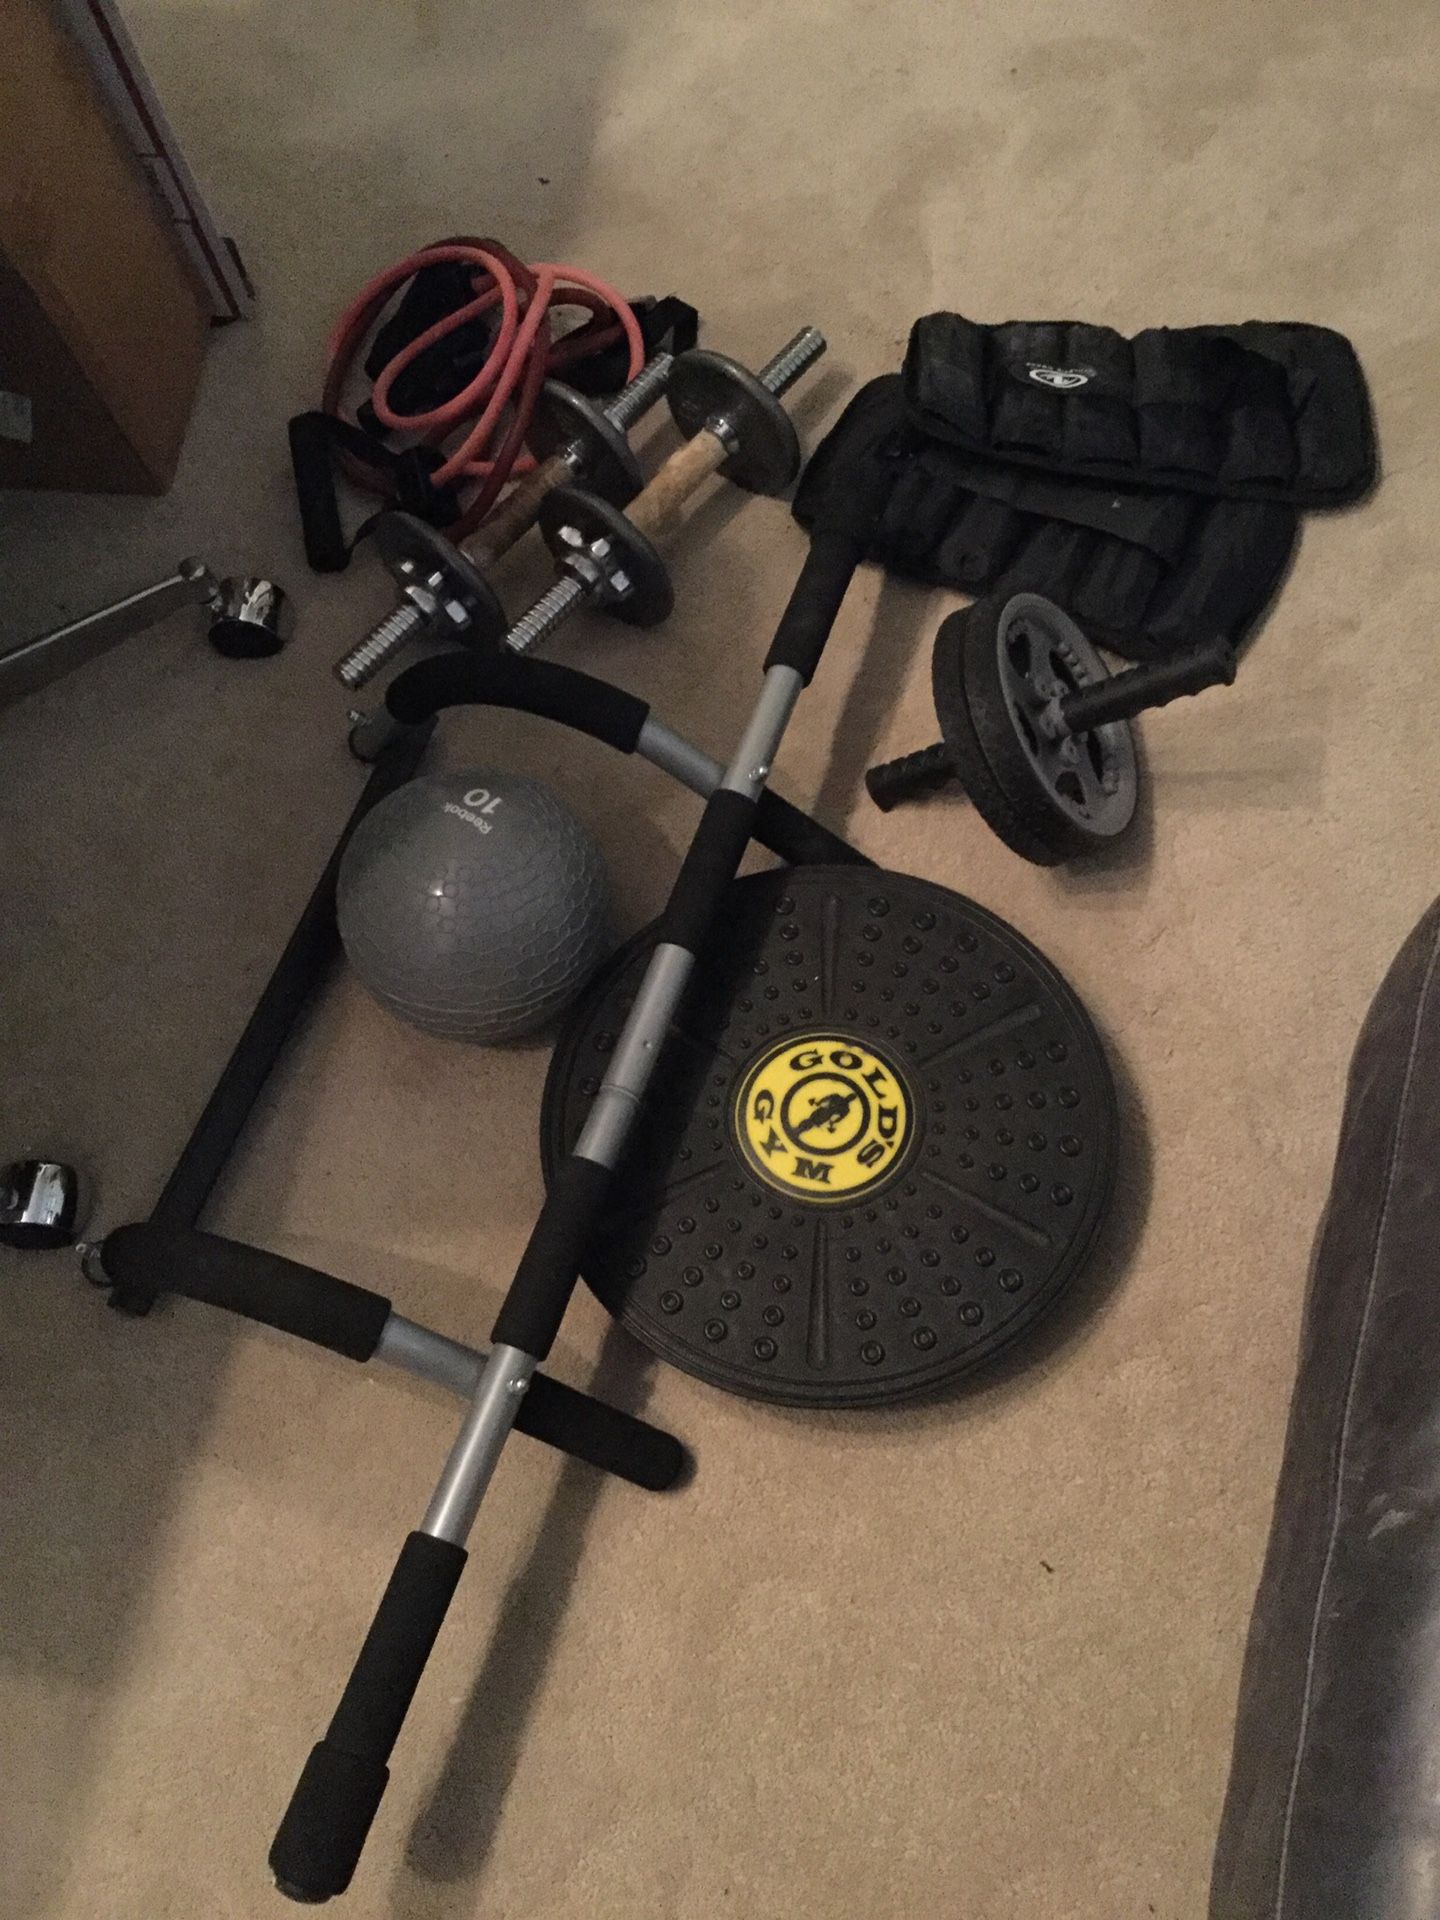 Home workout gym equipment